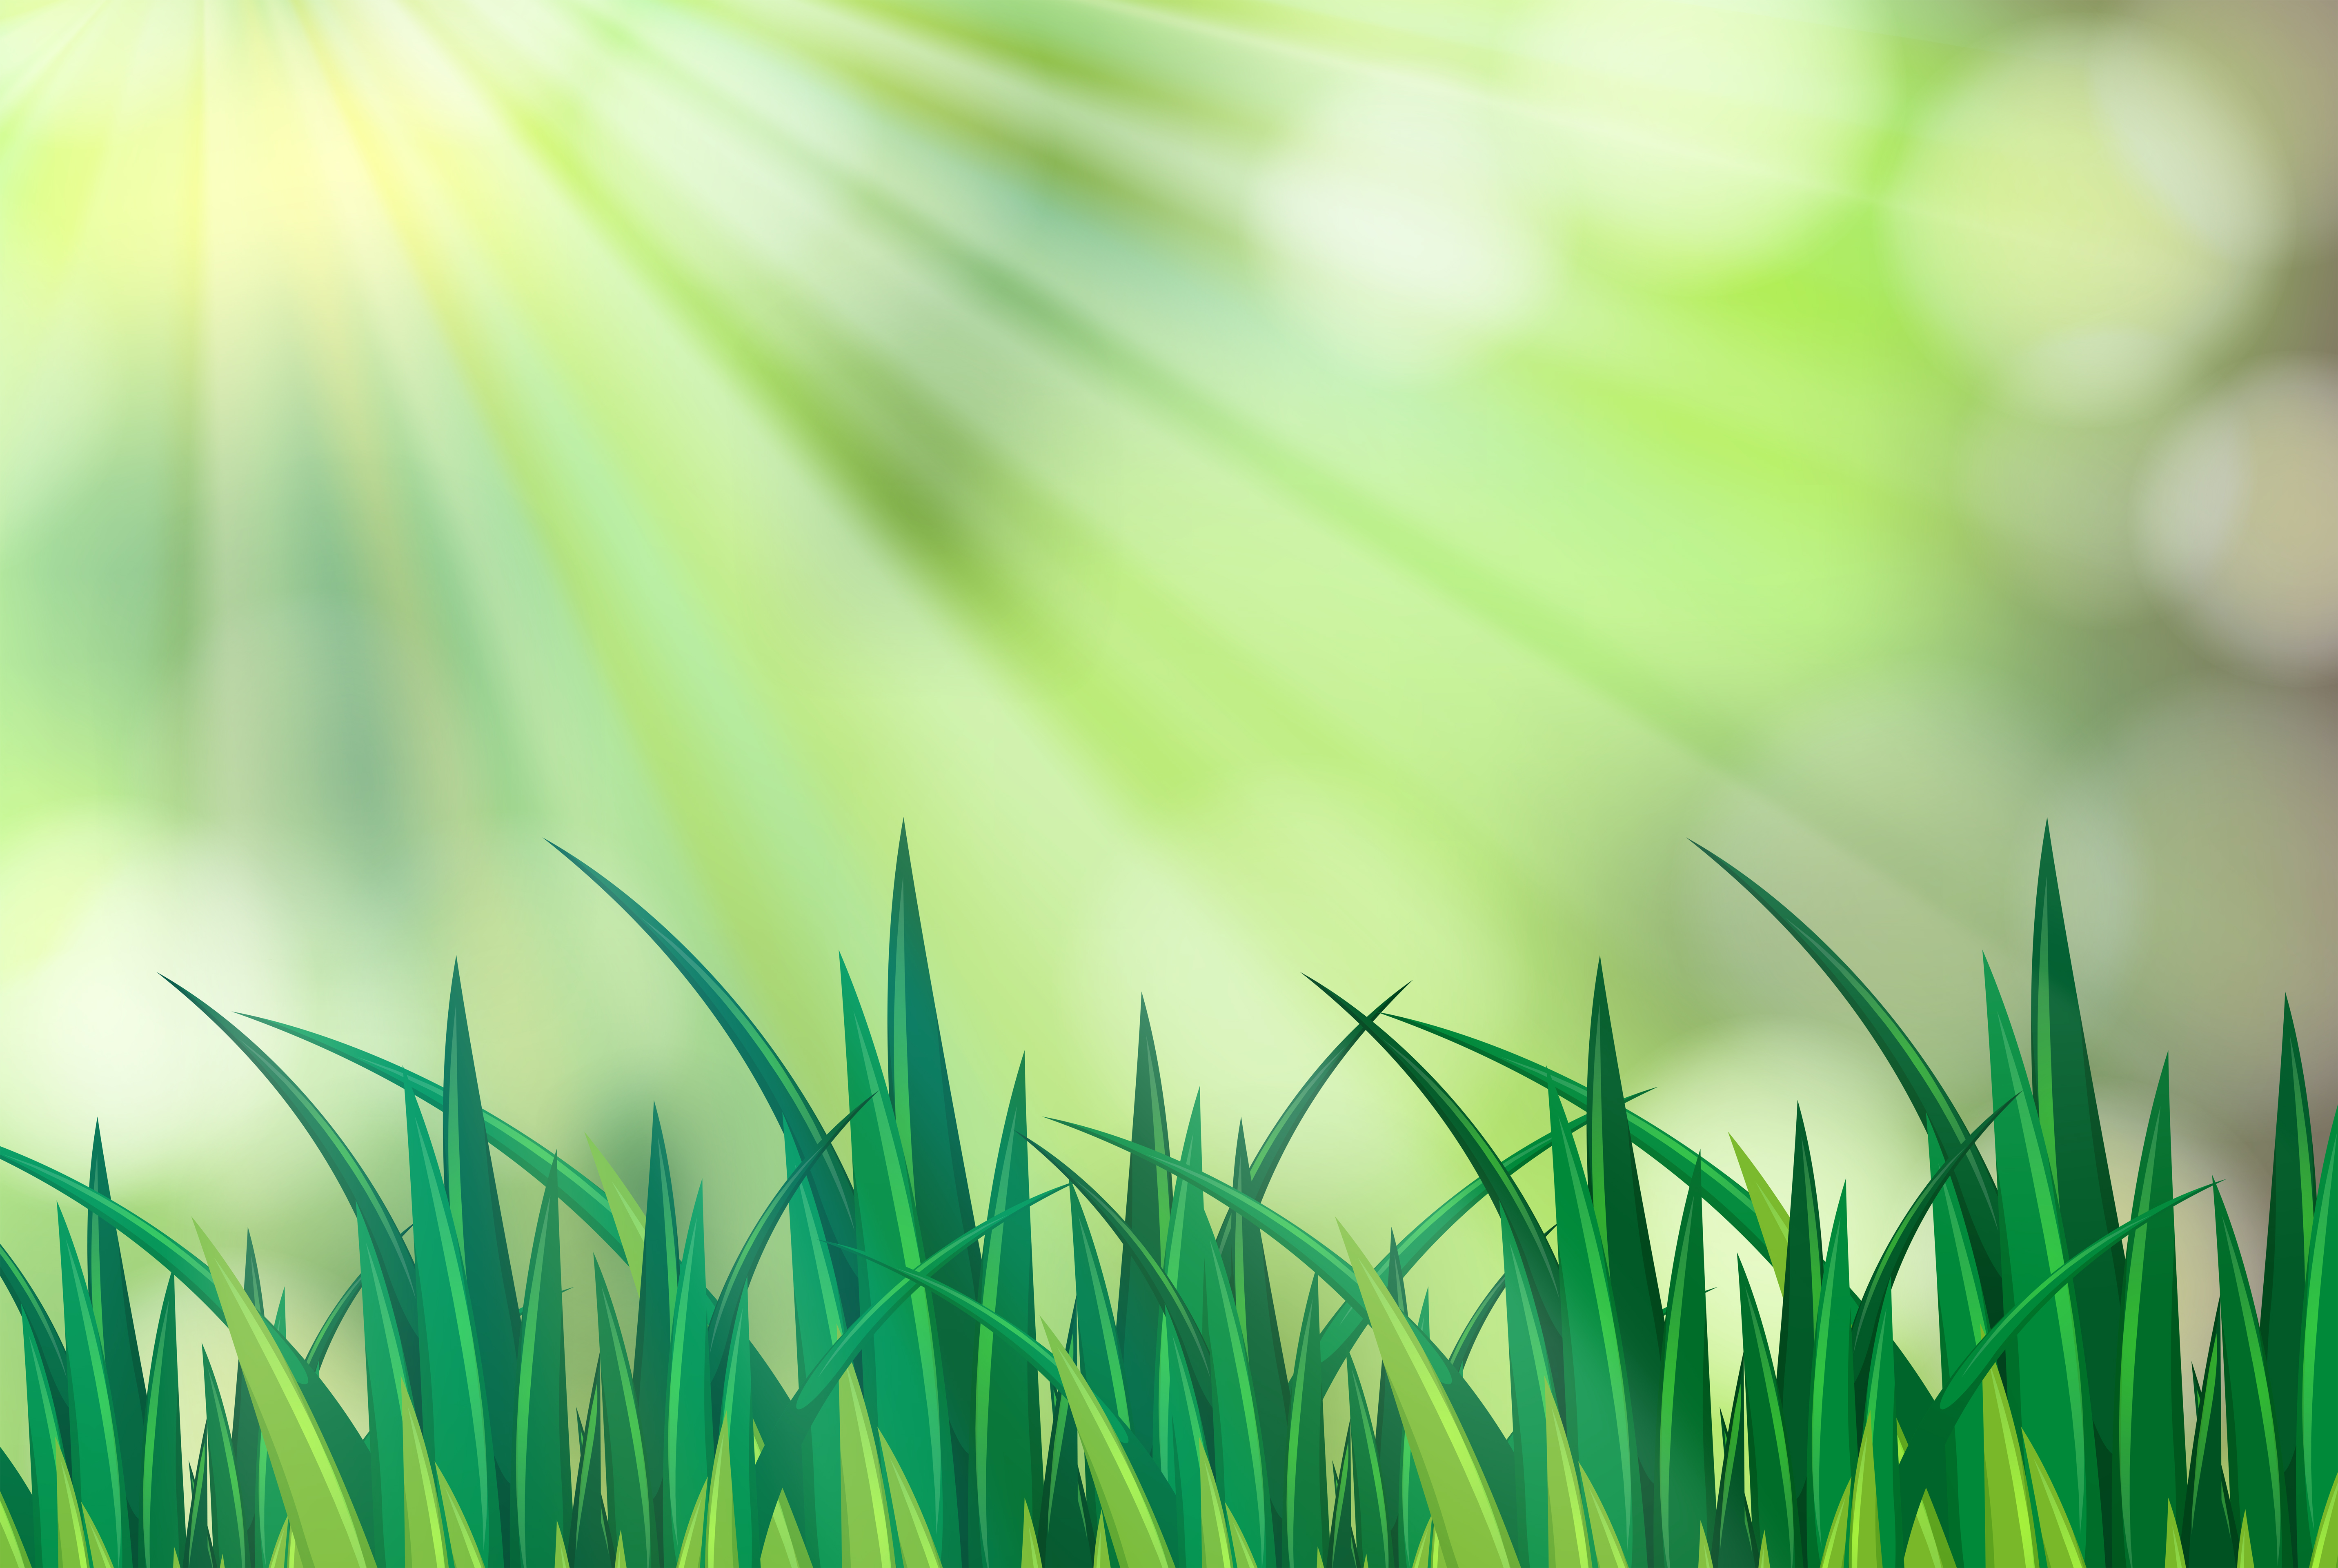 Background scene with green grass - Download Free Vectors, Clipart ...